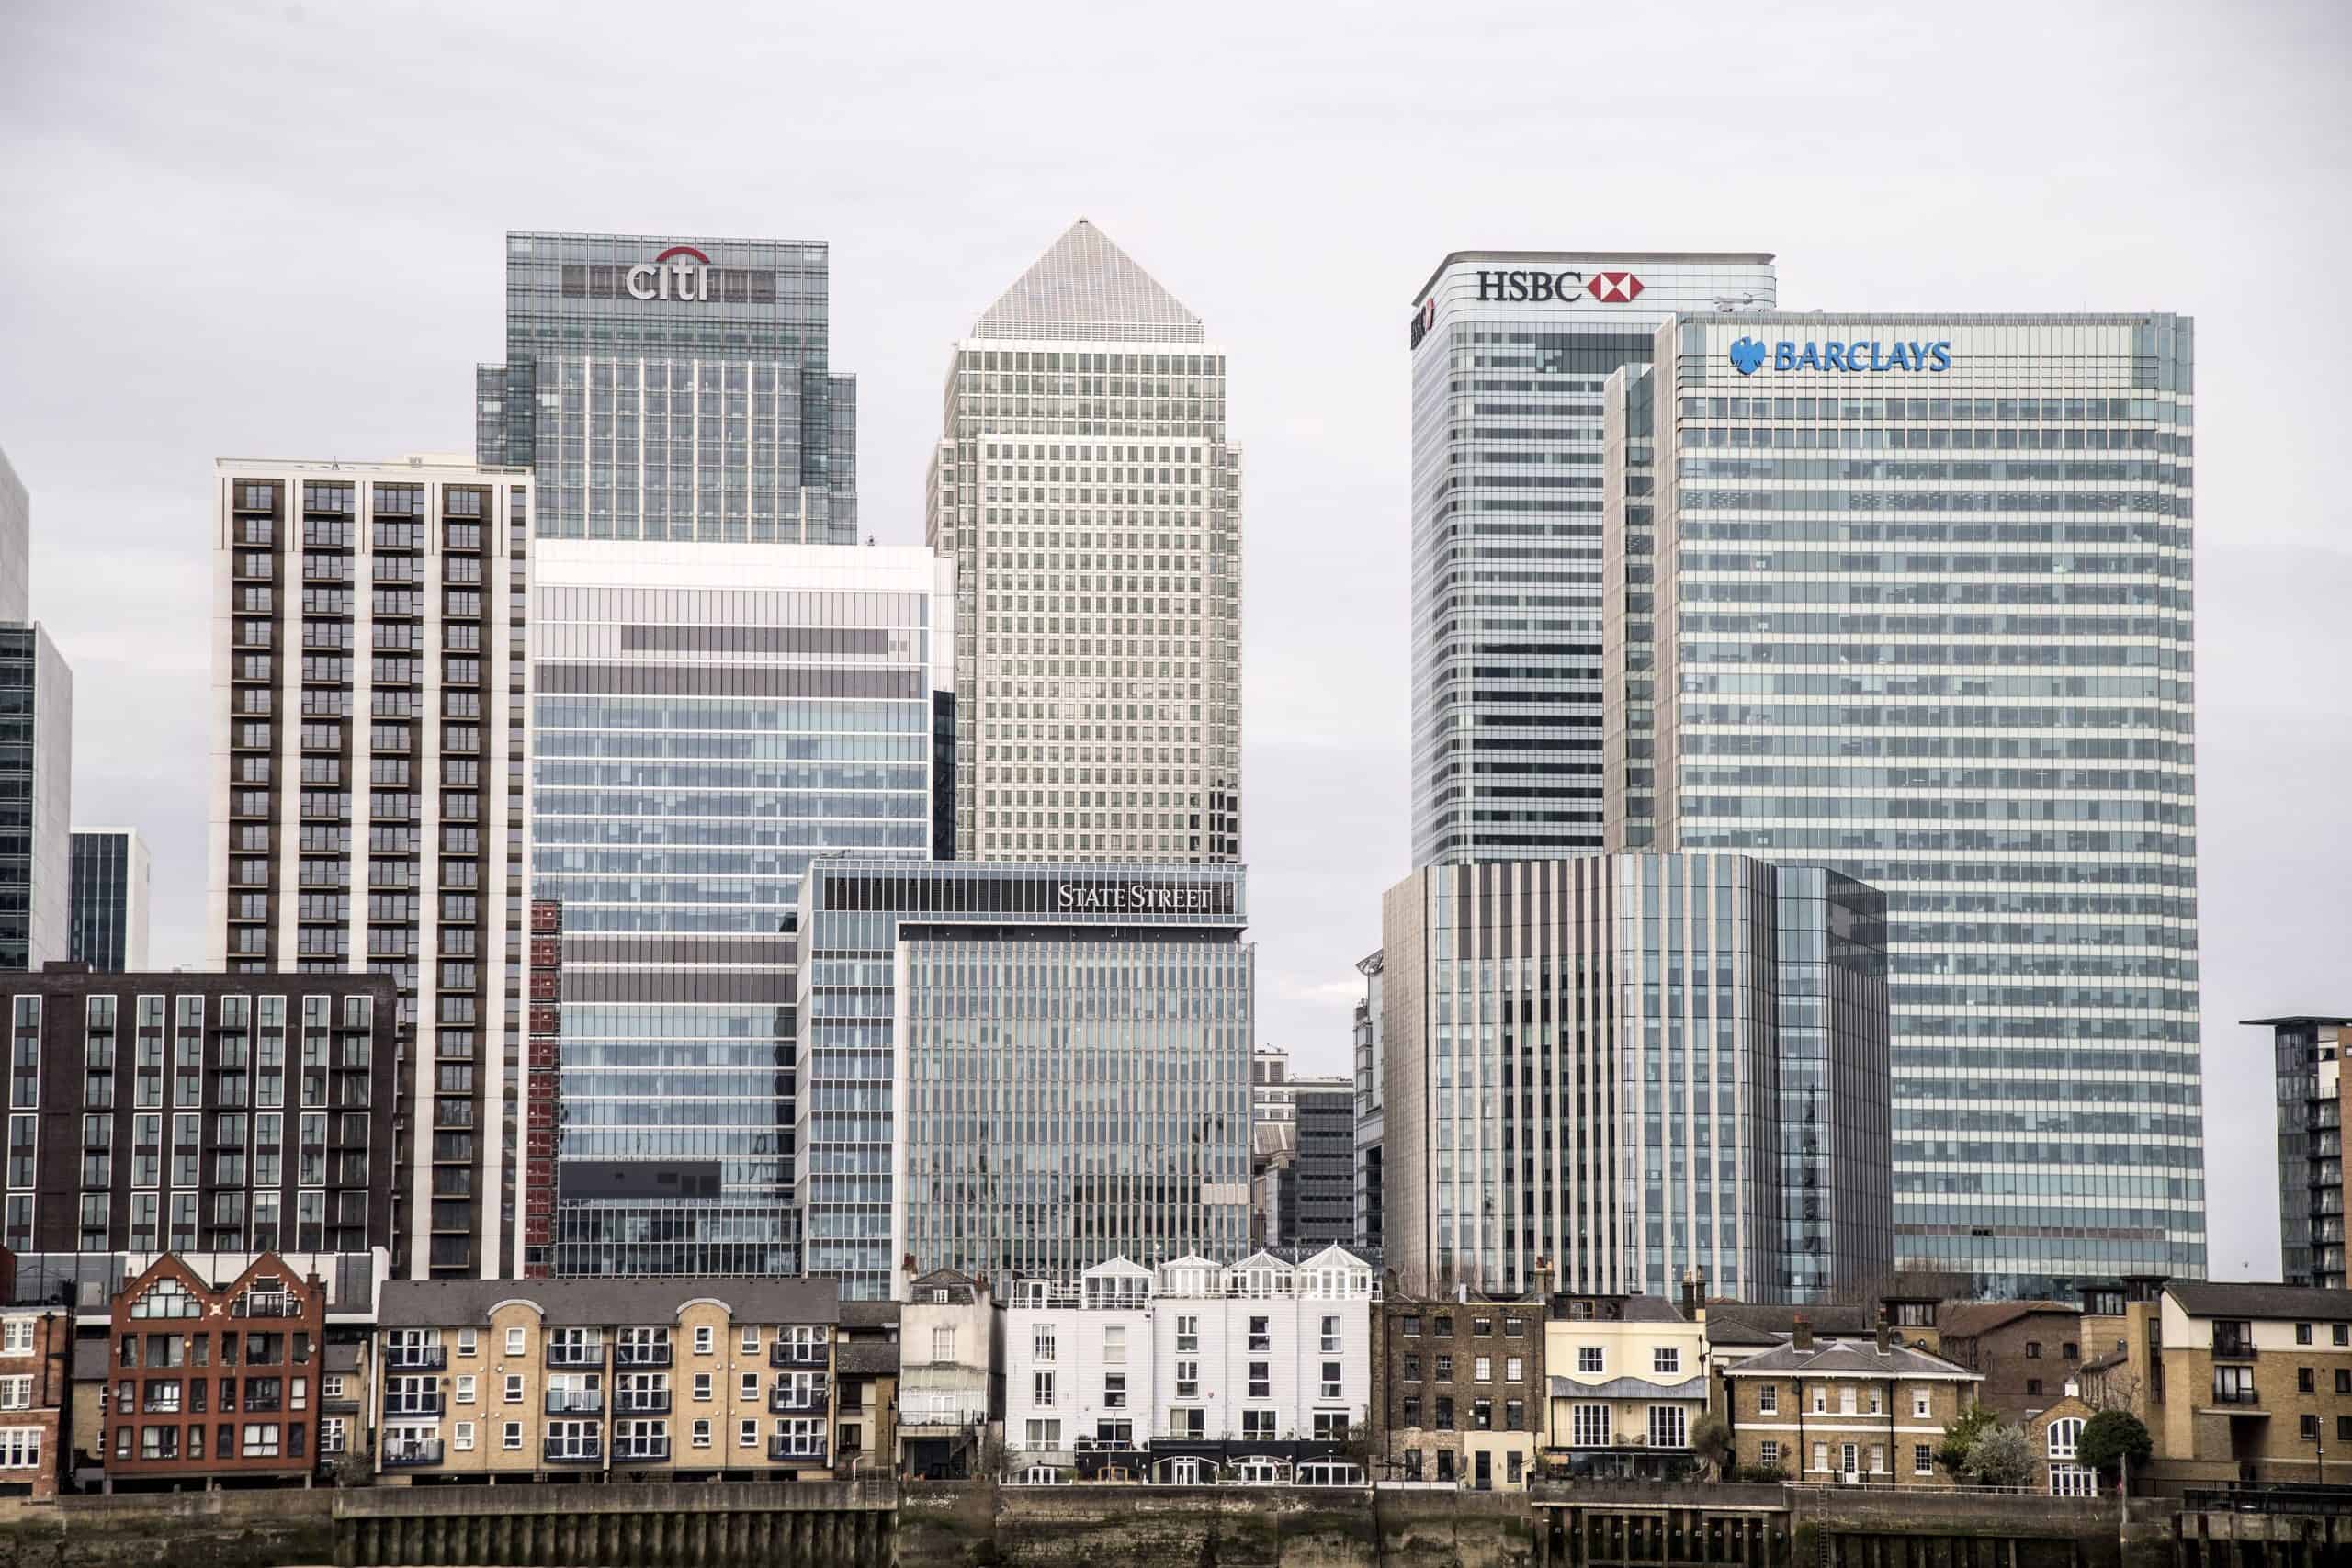 HSBC boss pockets eye-watering bonus as Brits face worst income squeeze in decades